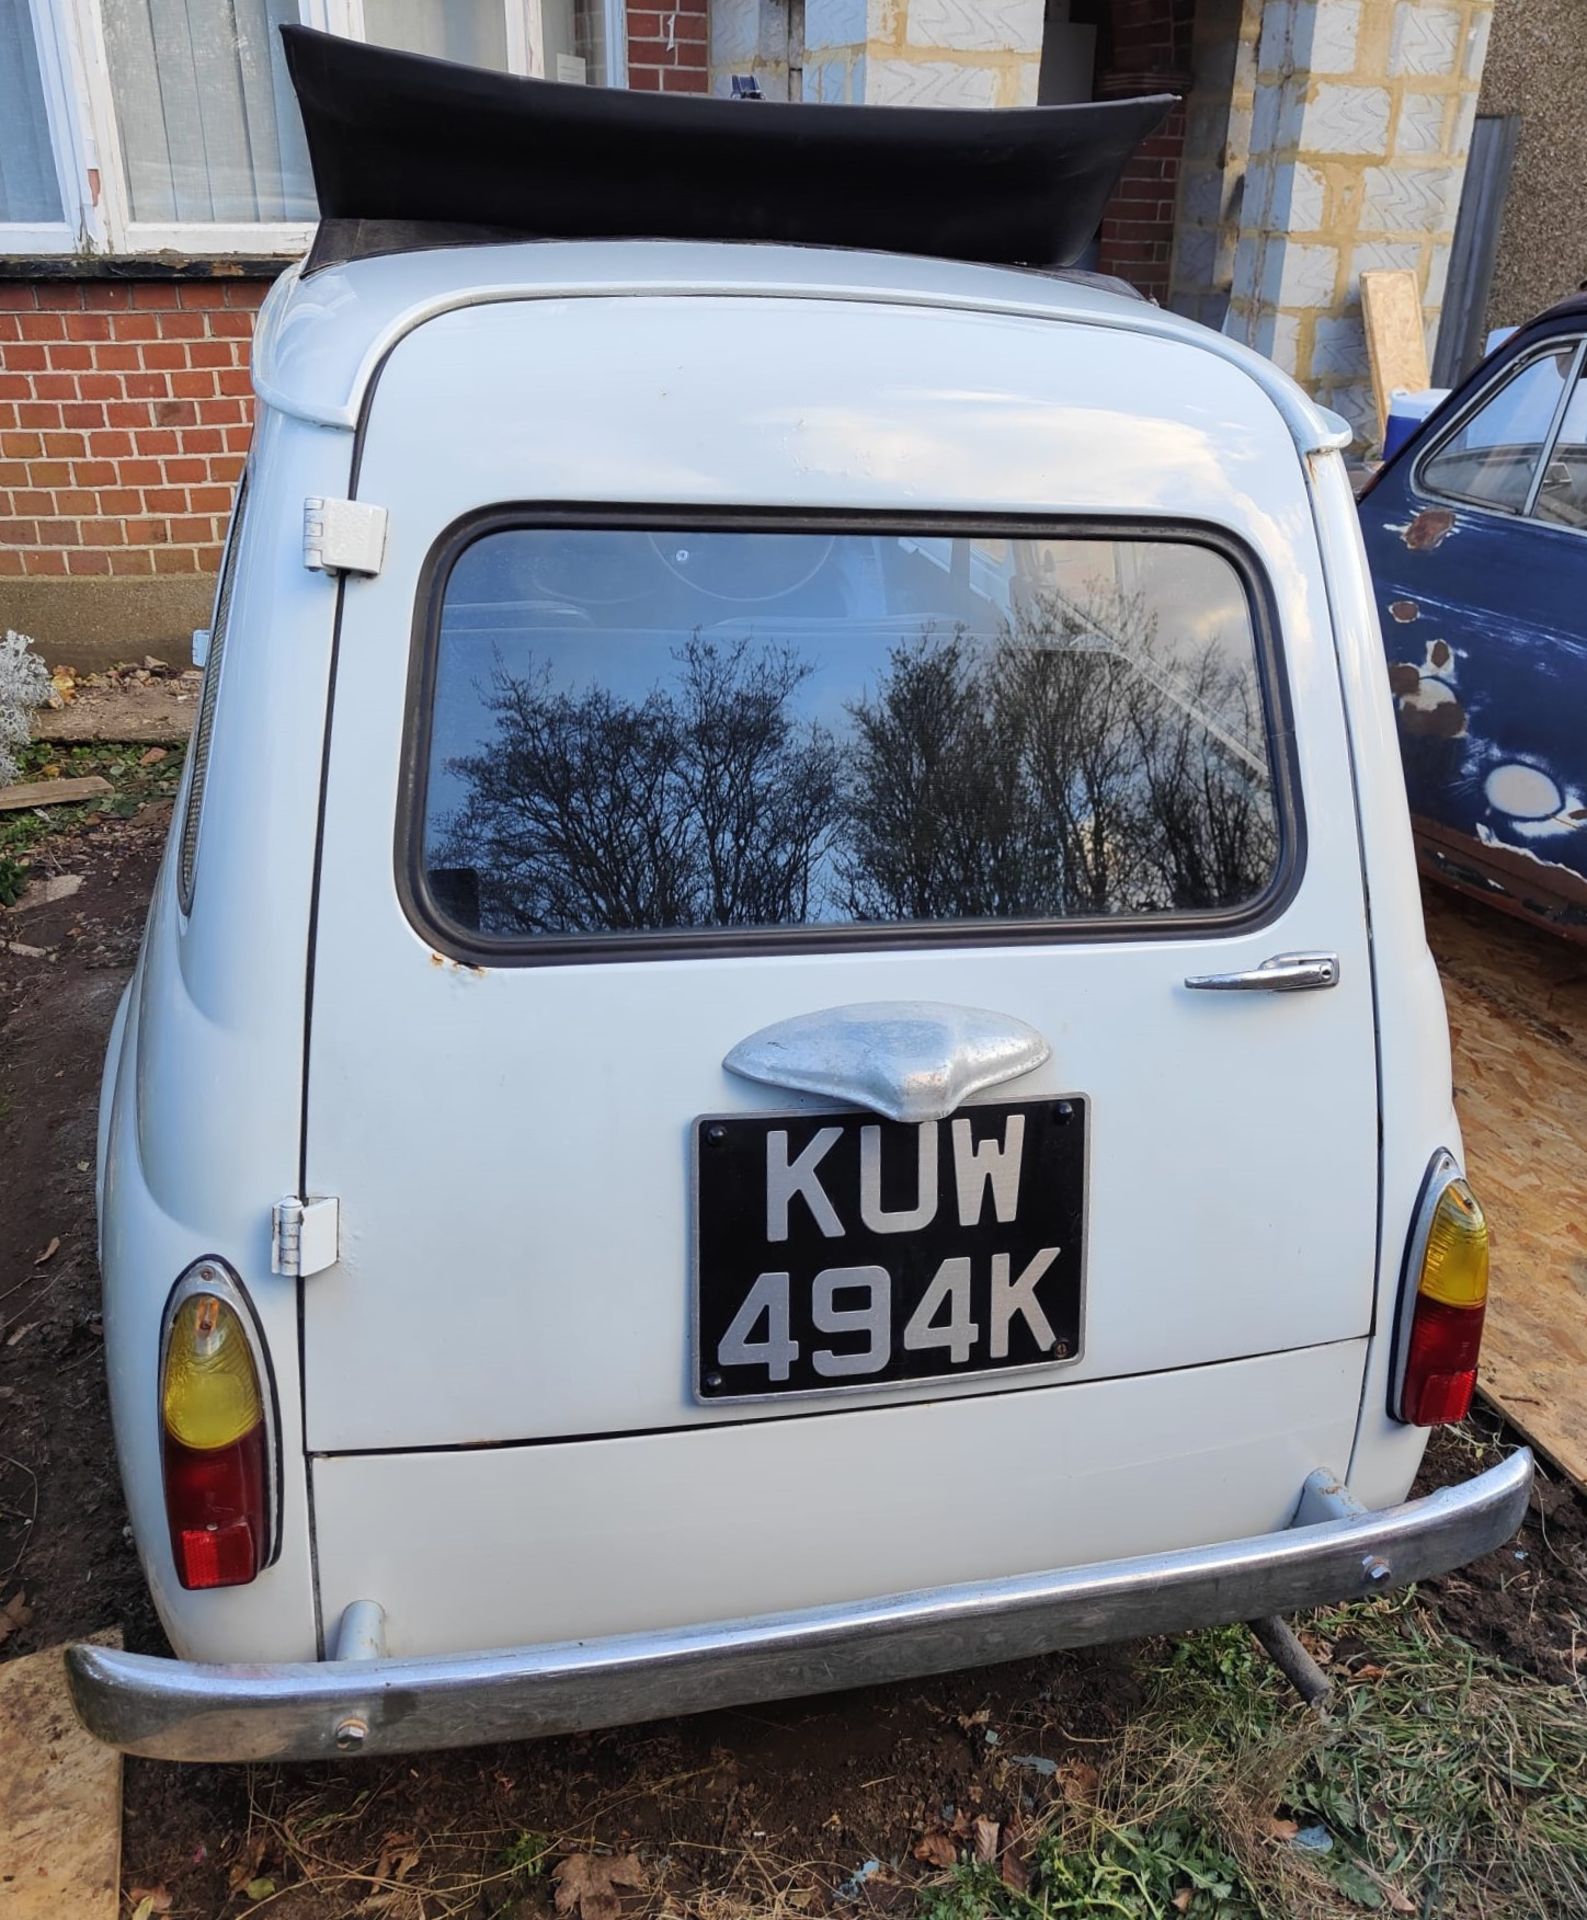 1971 FIAT 500 GIARDINIERA (RHD) Registration Number: KUW 494K Chassis Number: TBA Recorded - Image 5 of 14